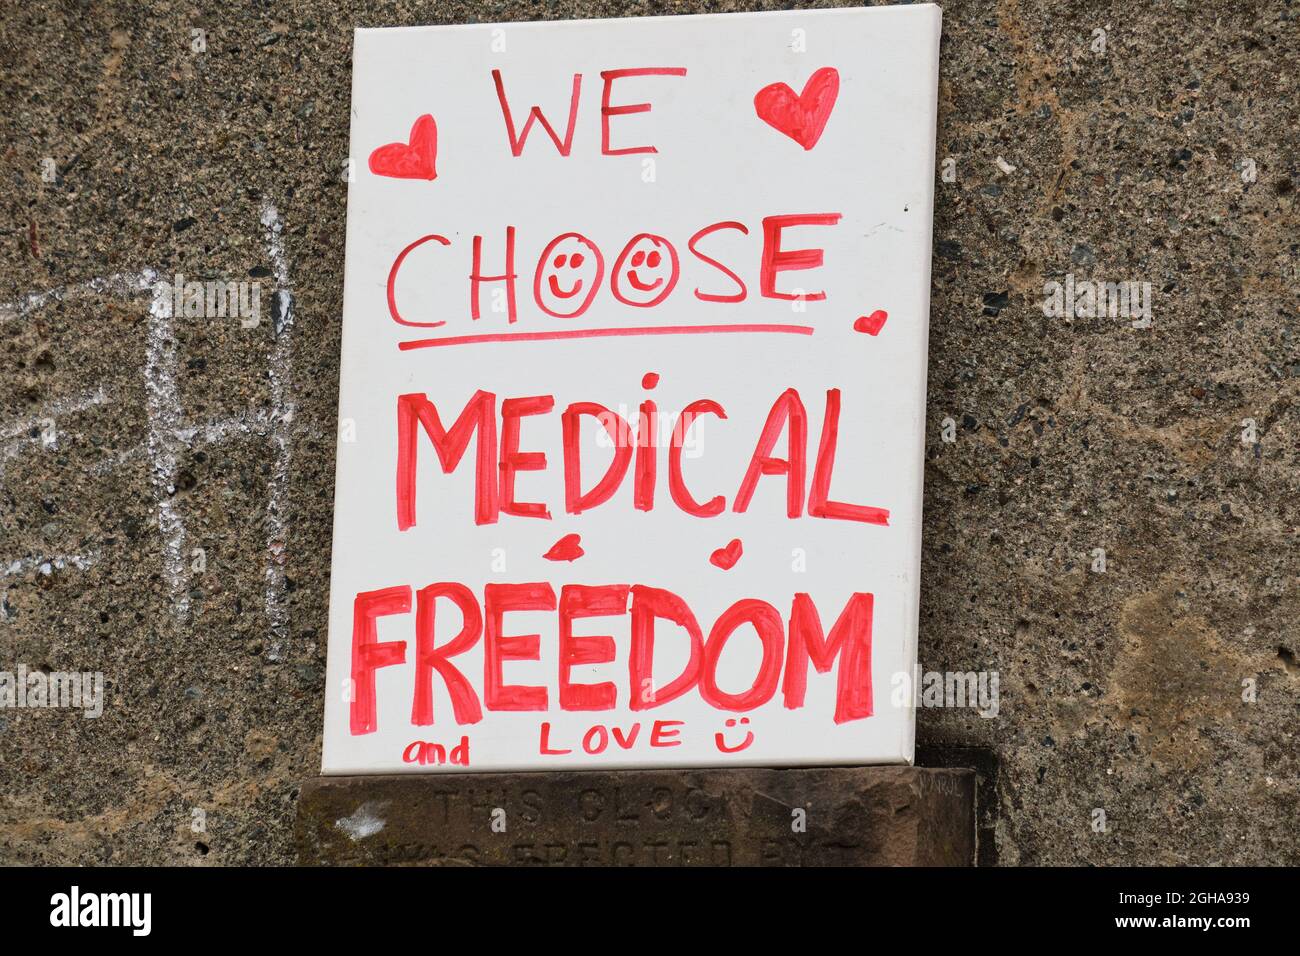 . We choose medical freedom sign at Freedom rally against proposed Vaccine mandates Stock Photo